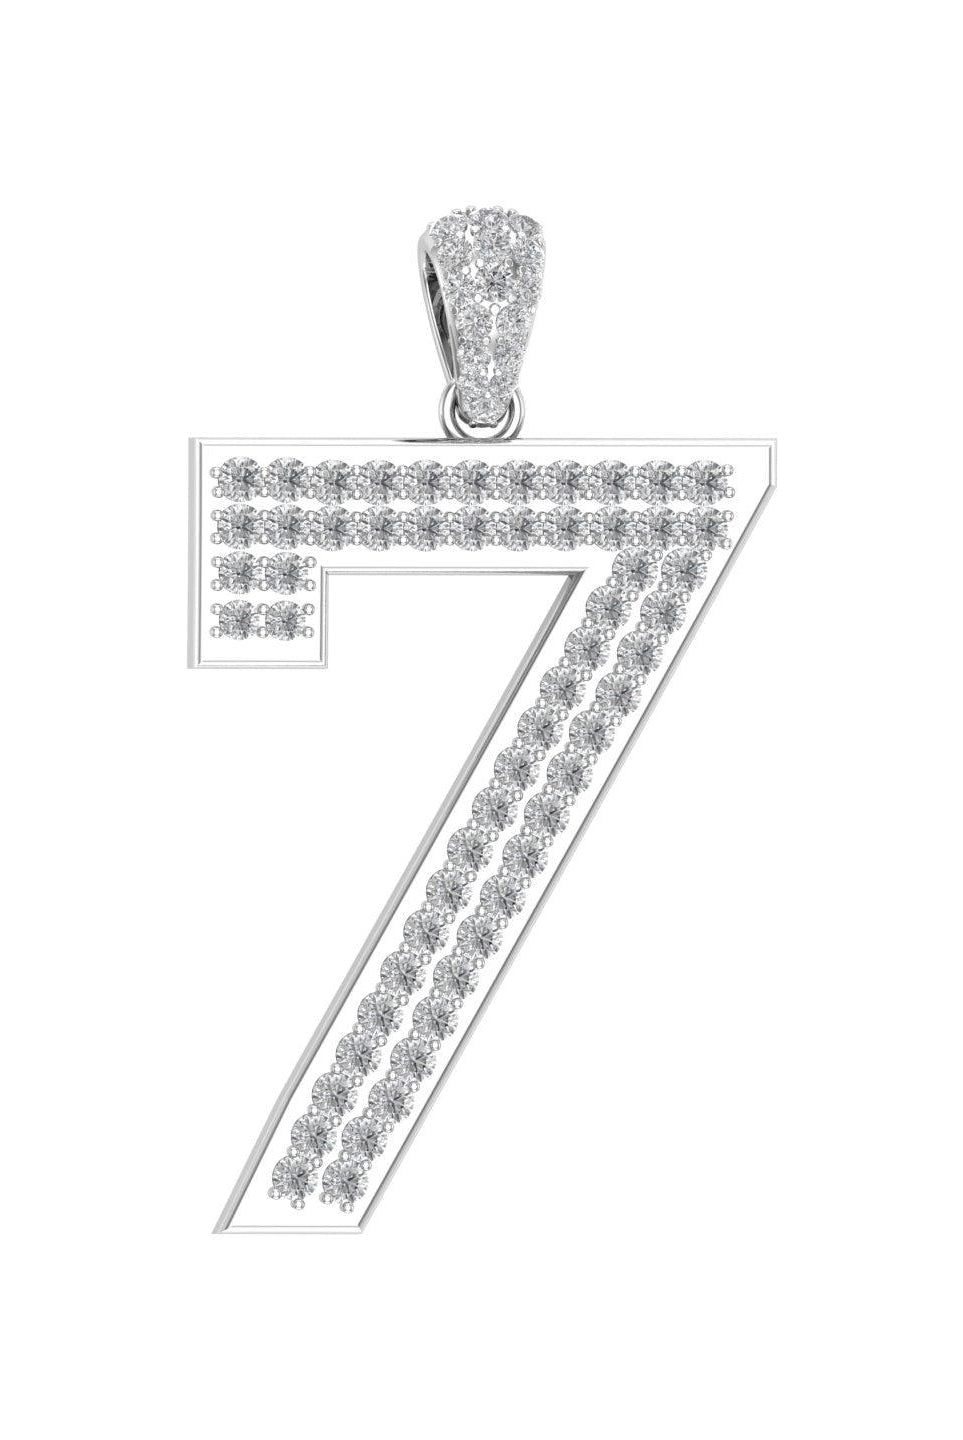 White Gold Color Pendant in the Shape of 7 Made of 925 Sterling Silver Material with 20 Inch Long Silver Chain